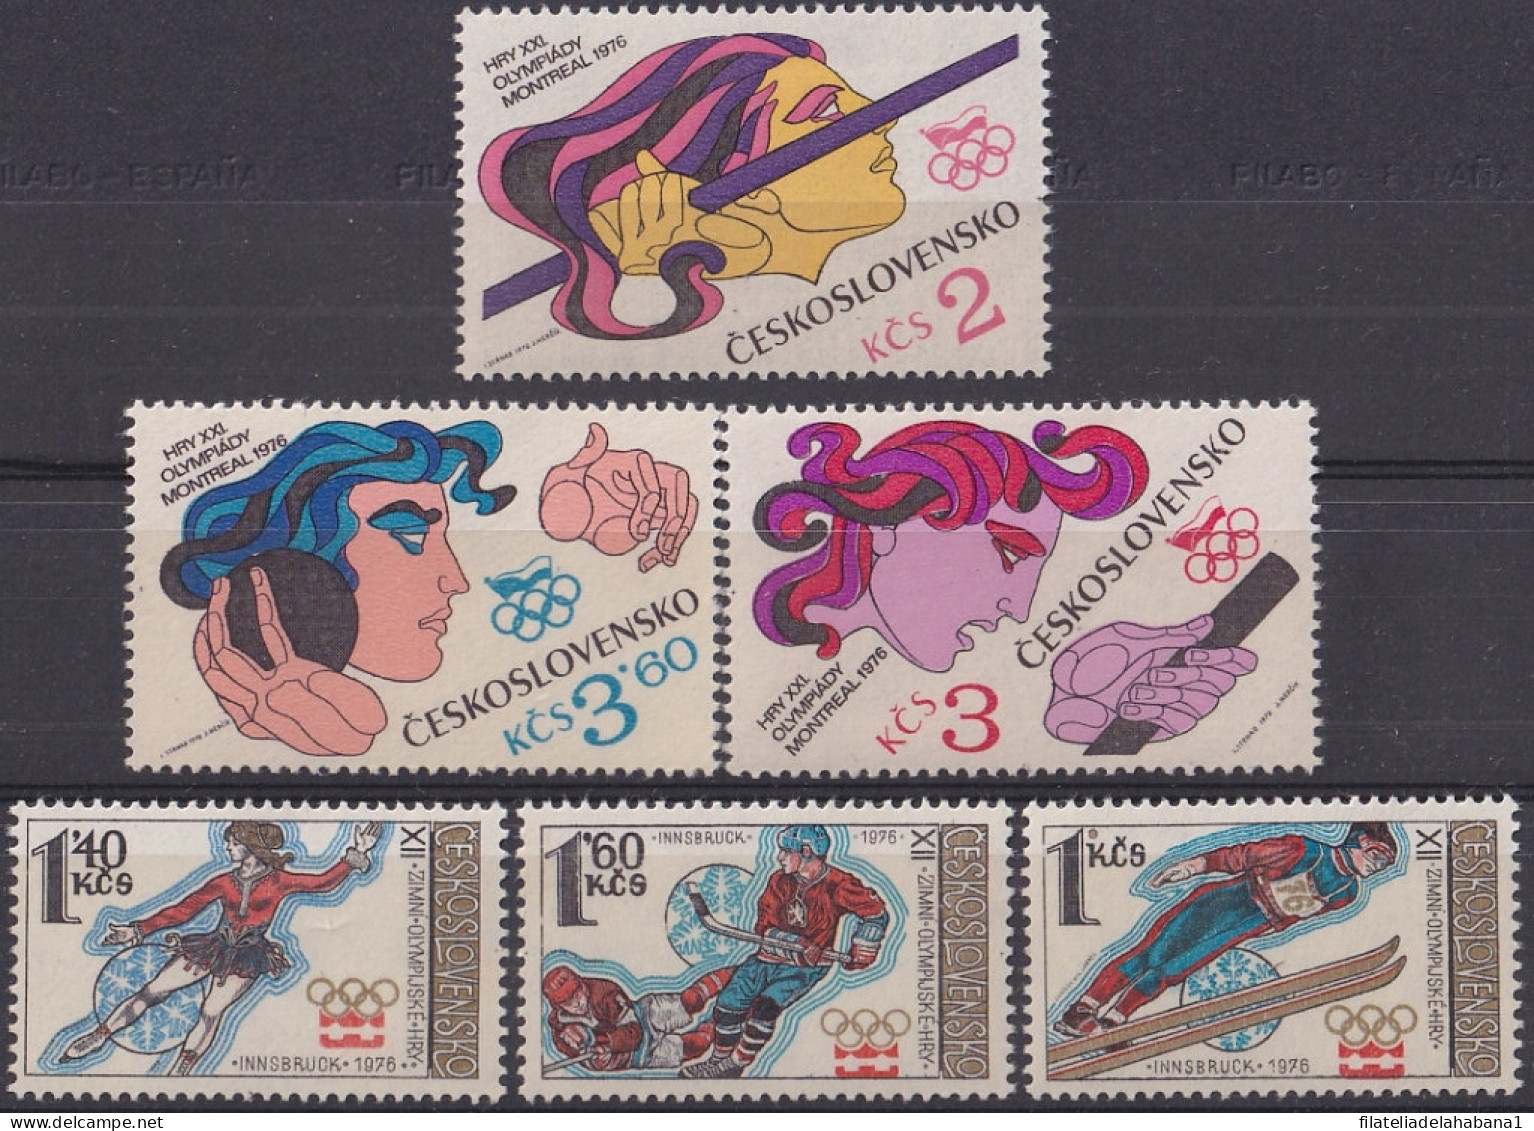 F-EX47611 CZECHOSLOVAKIA MNH 1976 MONTREAL OLYMPIC GAMES & INNSBRUCK.  - Sommer 1976: Montreal